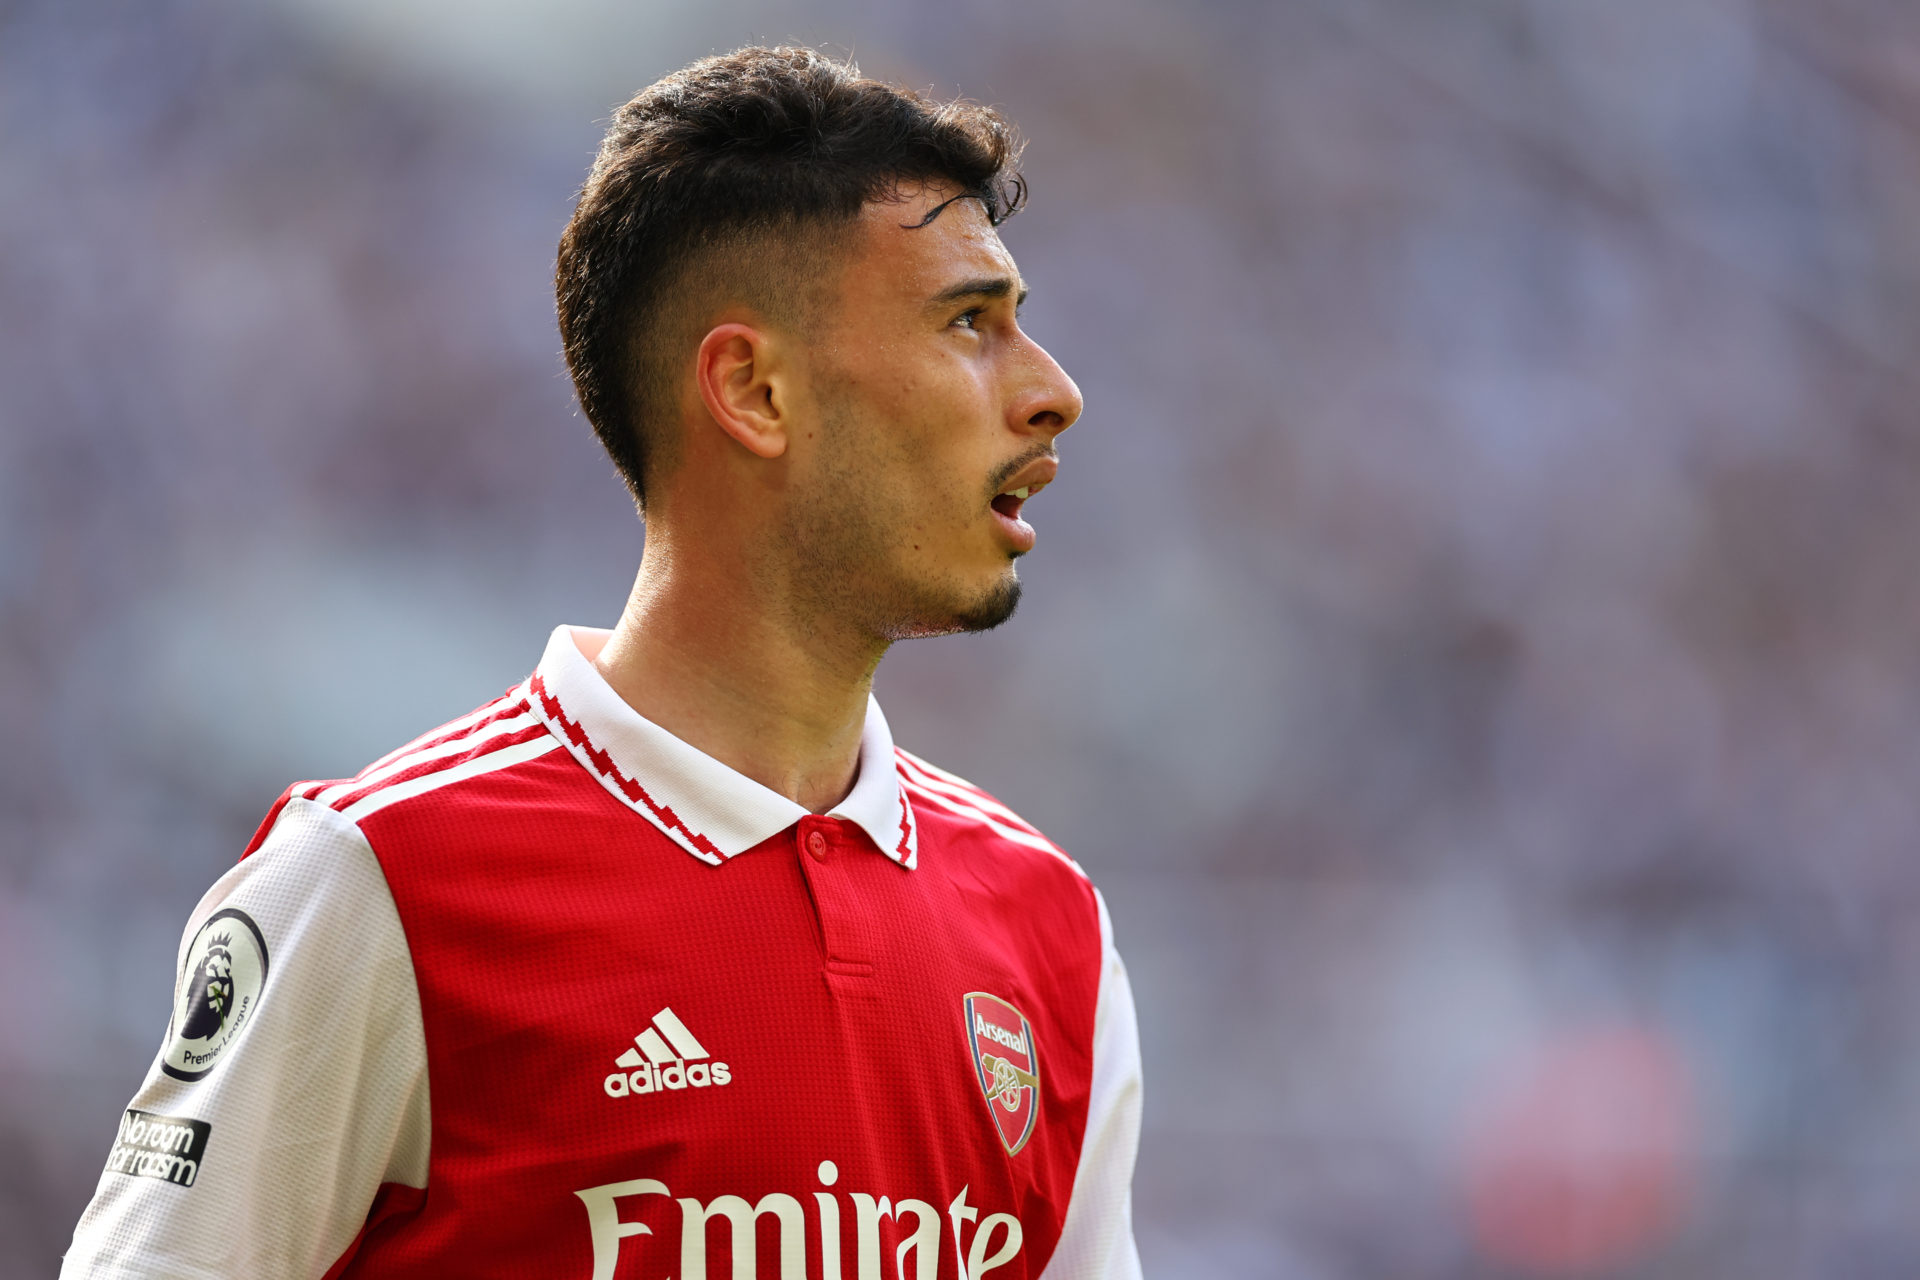 Gabriel Martinelli seriously impressed with 20-year-old Arsenal player after match-winning performance